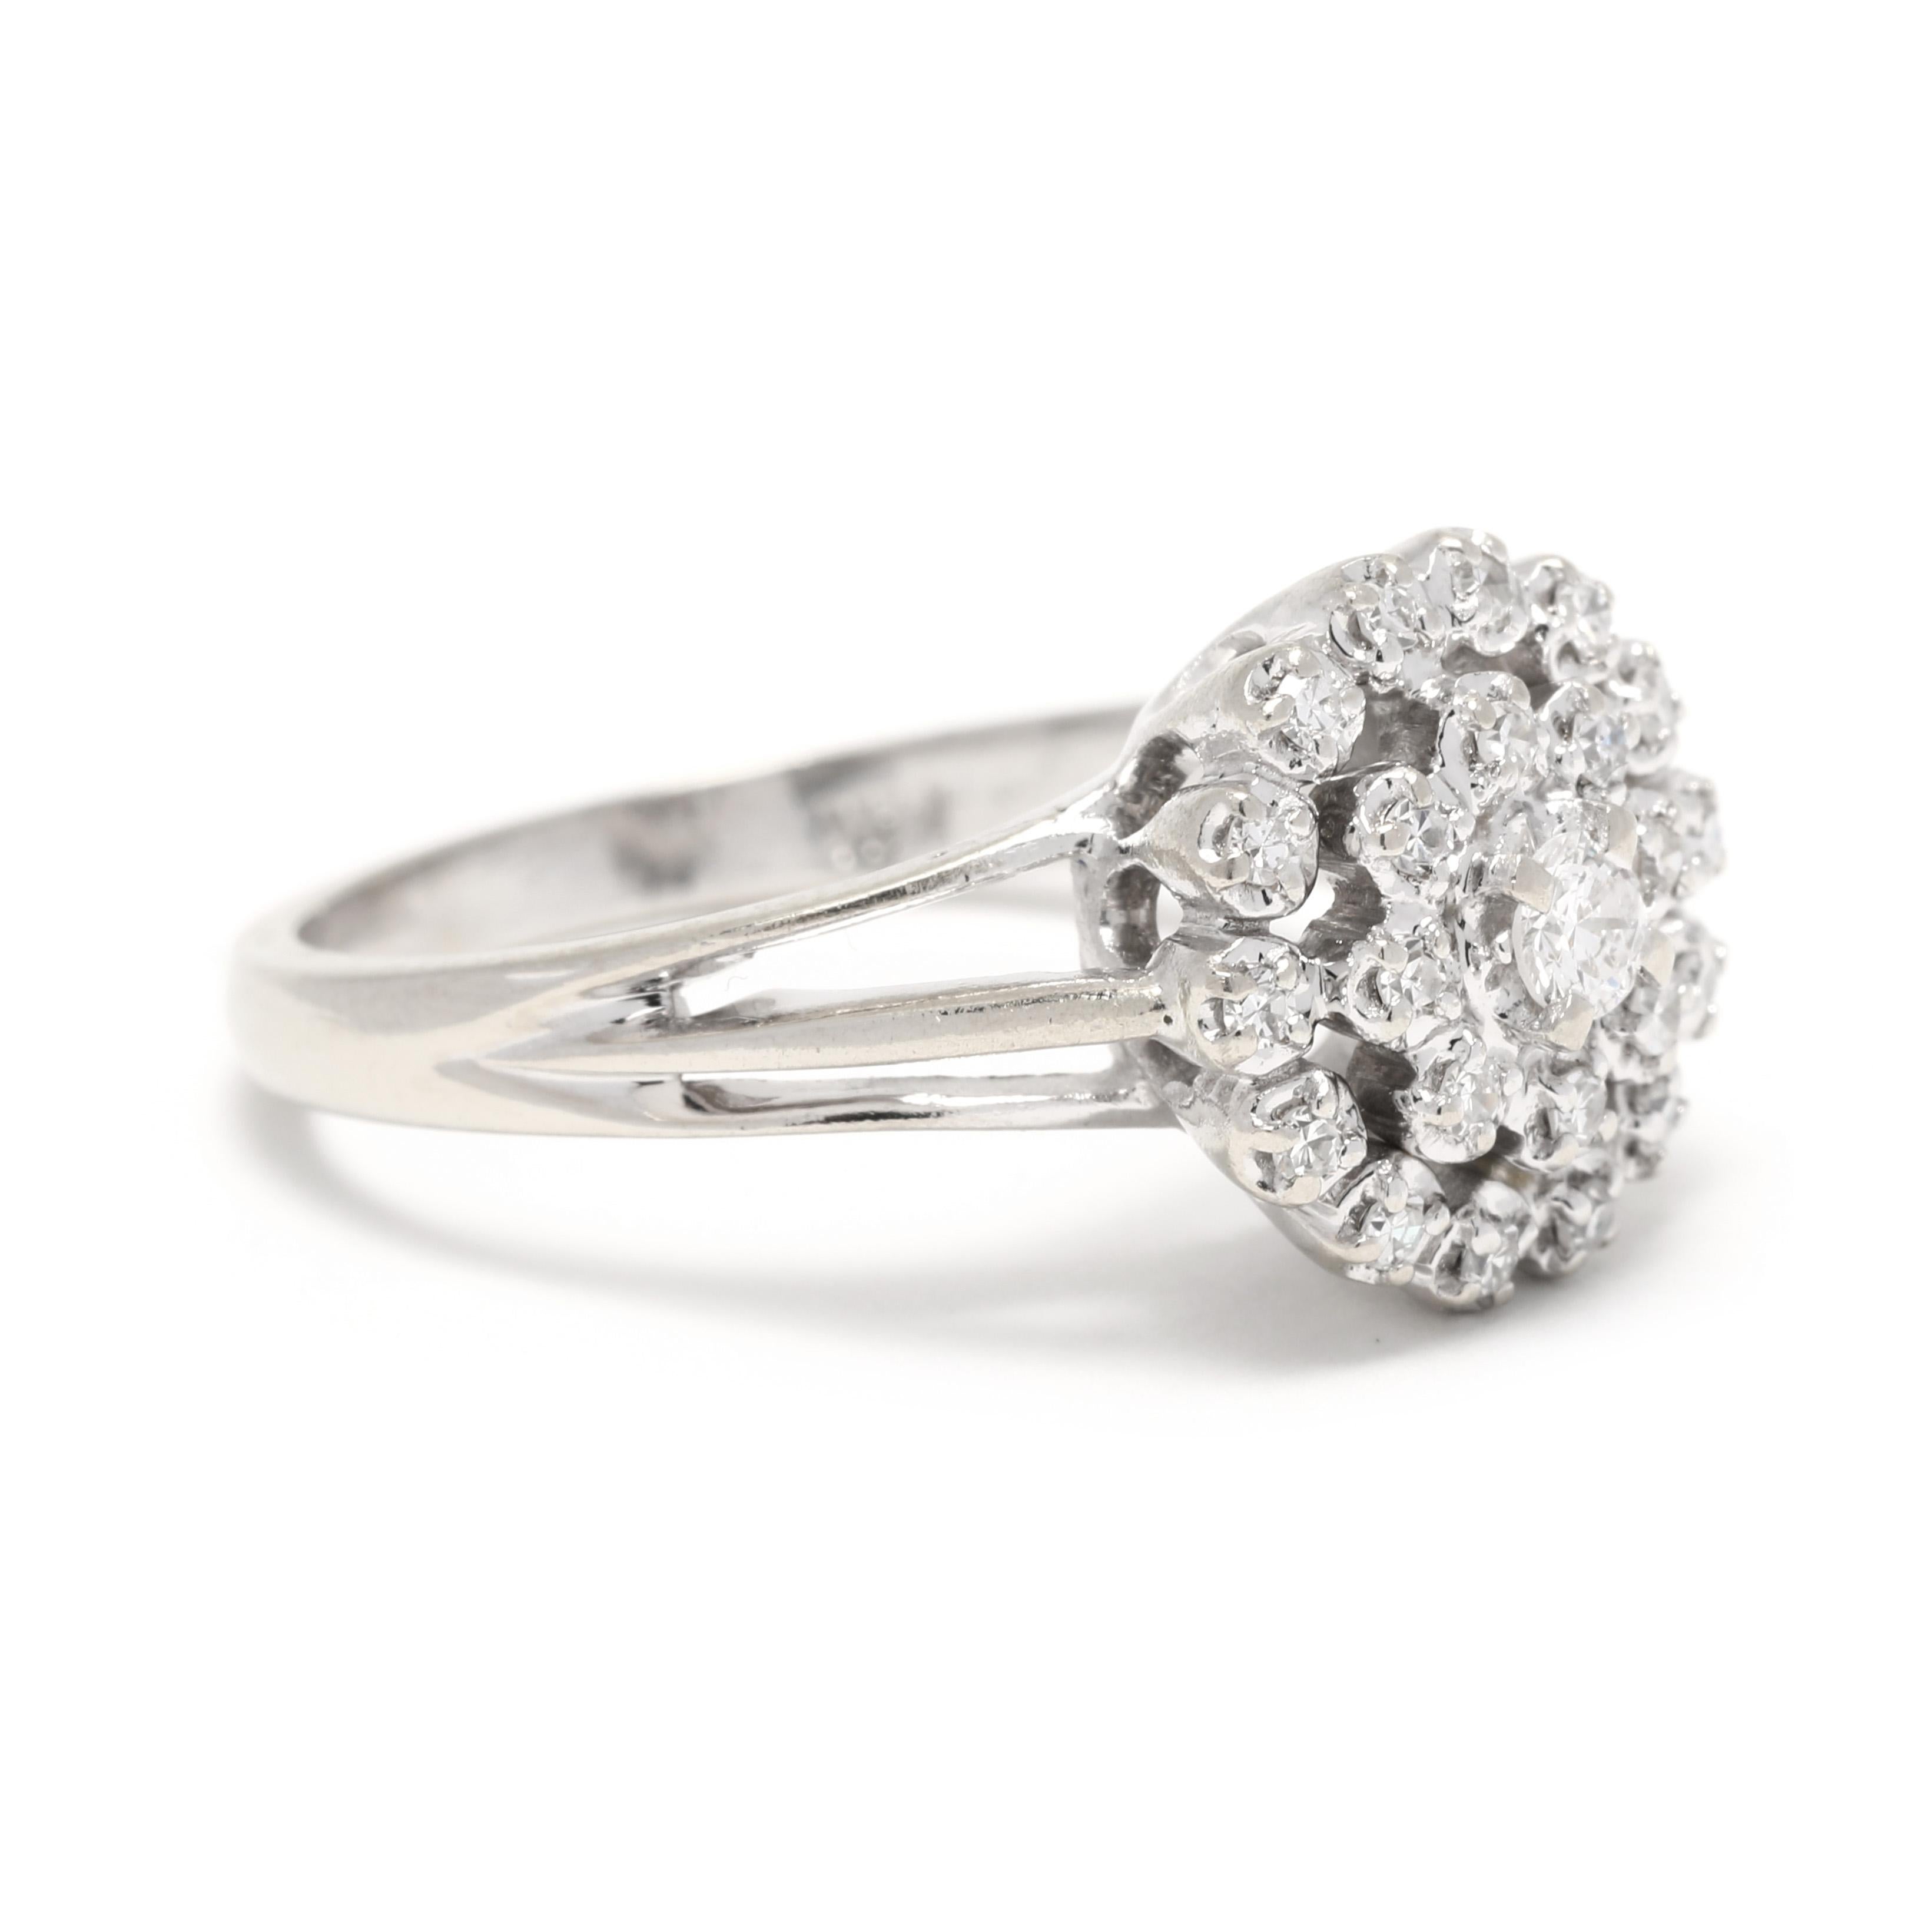 This 0.25ctw diamond cluster halo engagement ring is a perfect way to show your love on your wedding day. Handcrafted in 14K white gold, this stunning piece features a cluster of shimmering diamonds encircled by a halo of smaller diamonds. The ring